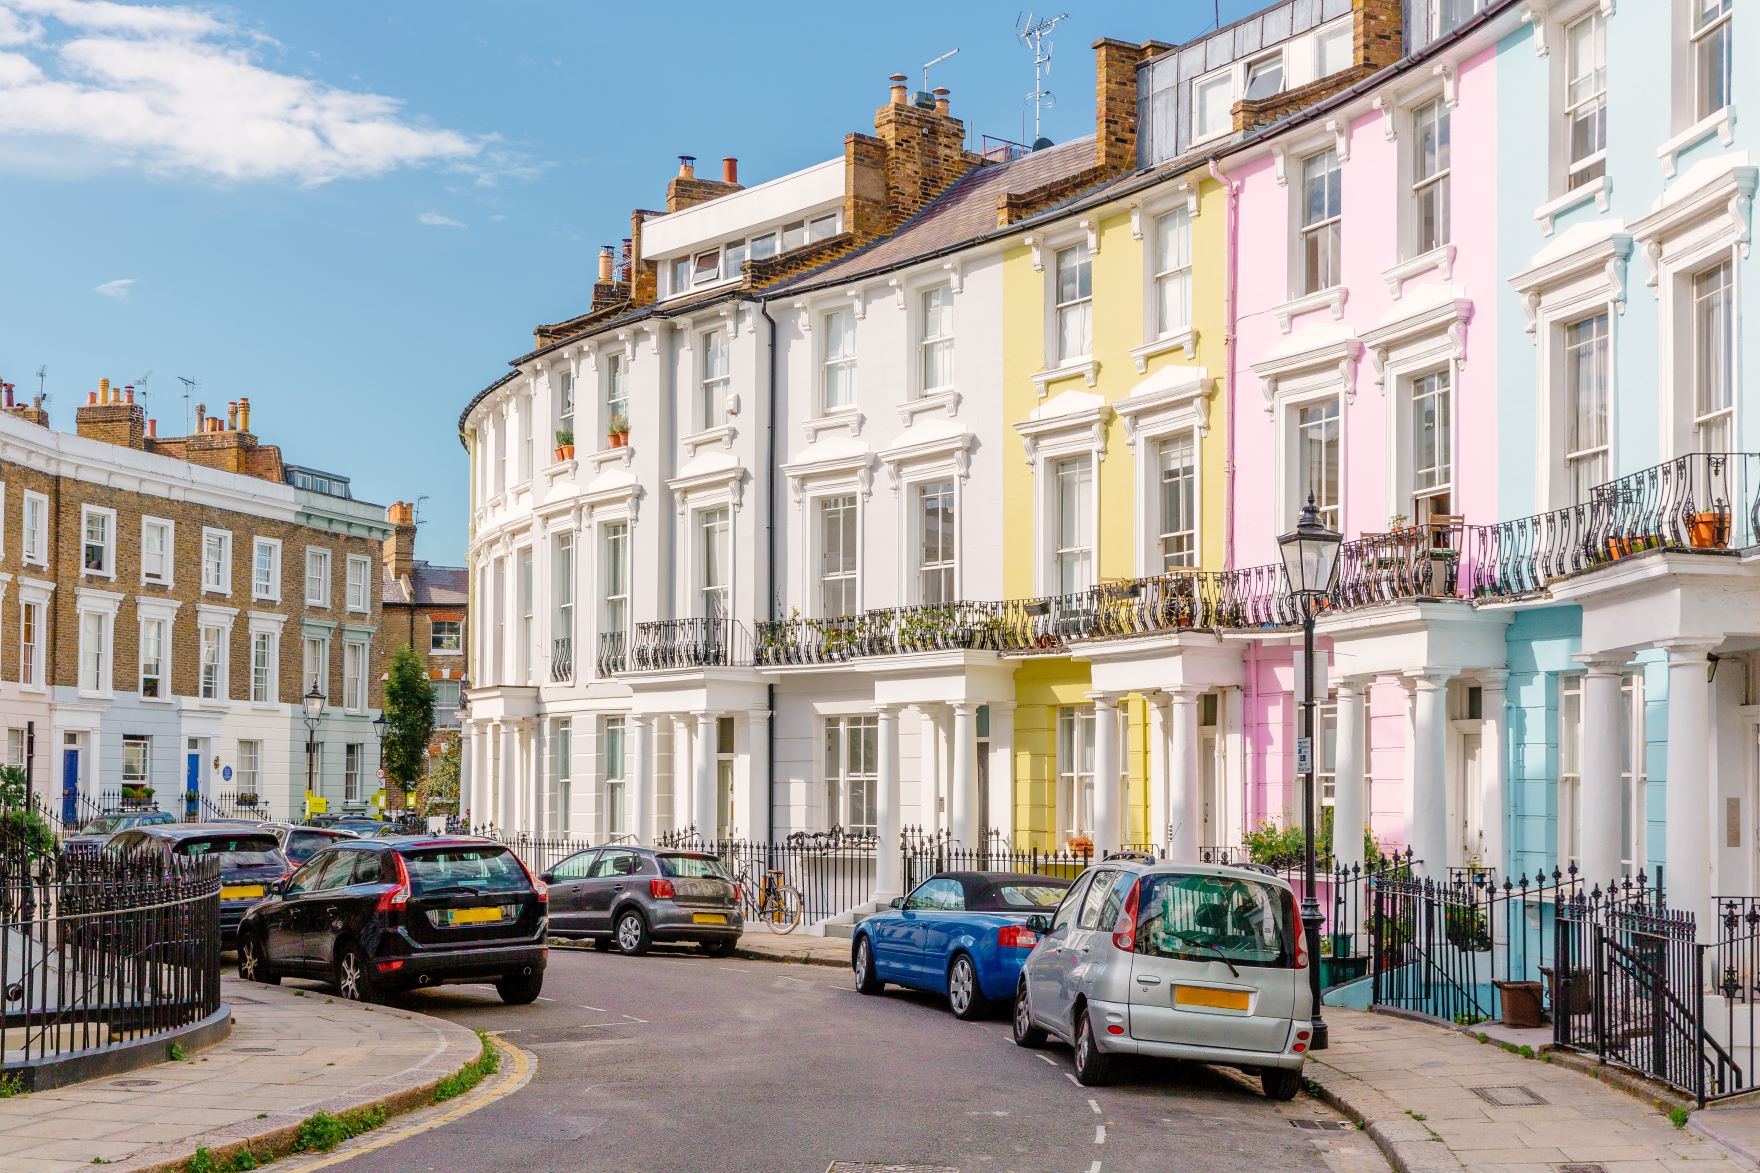 Your local area guide to Primrose Hill and Belsize Park - Knight 